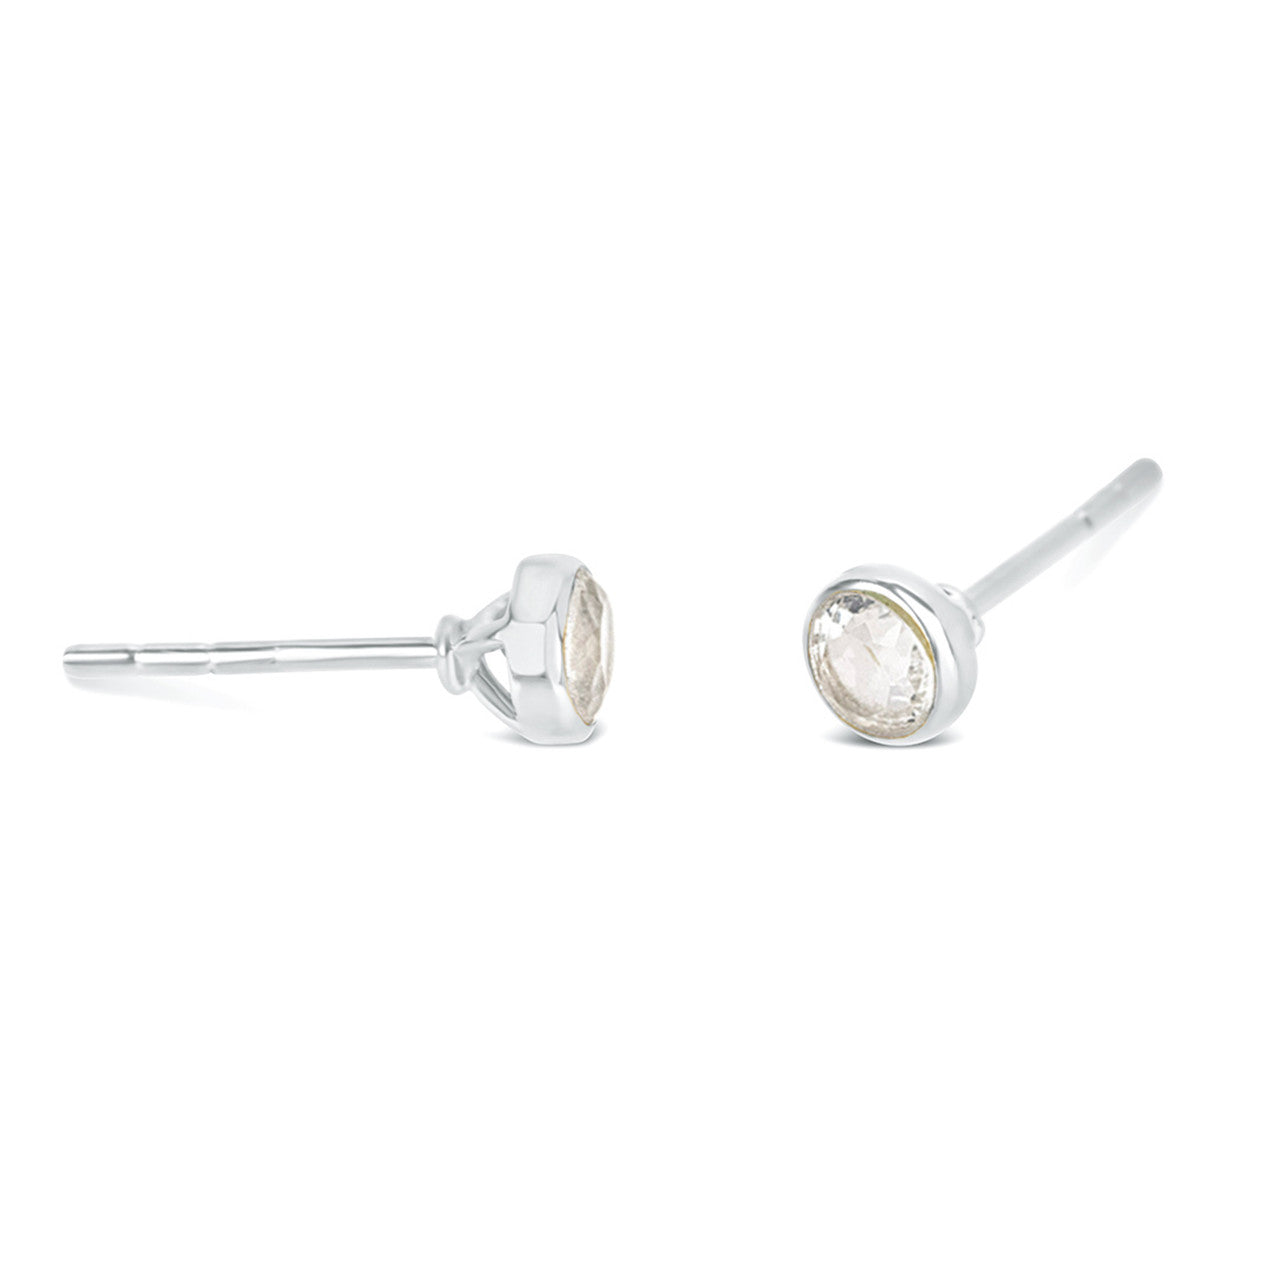 White quartz mini stud earrings in silver facing the side on a white background